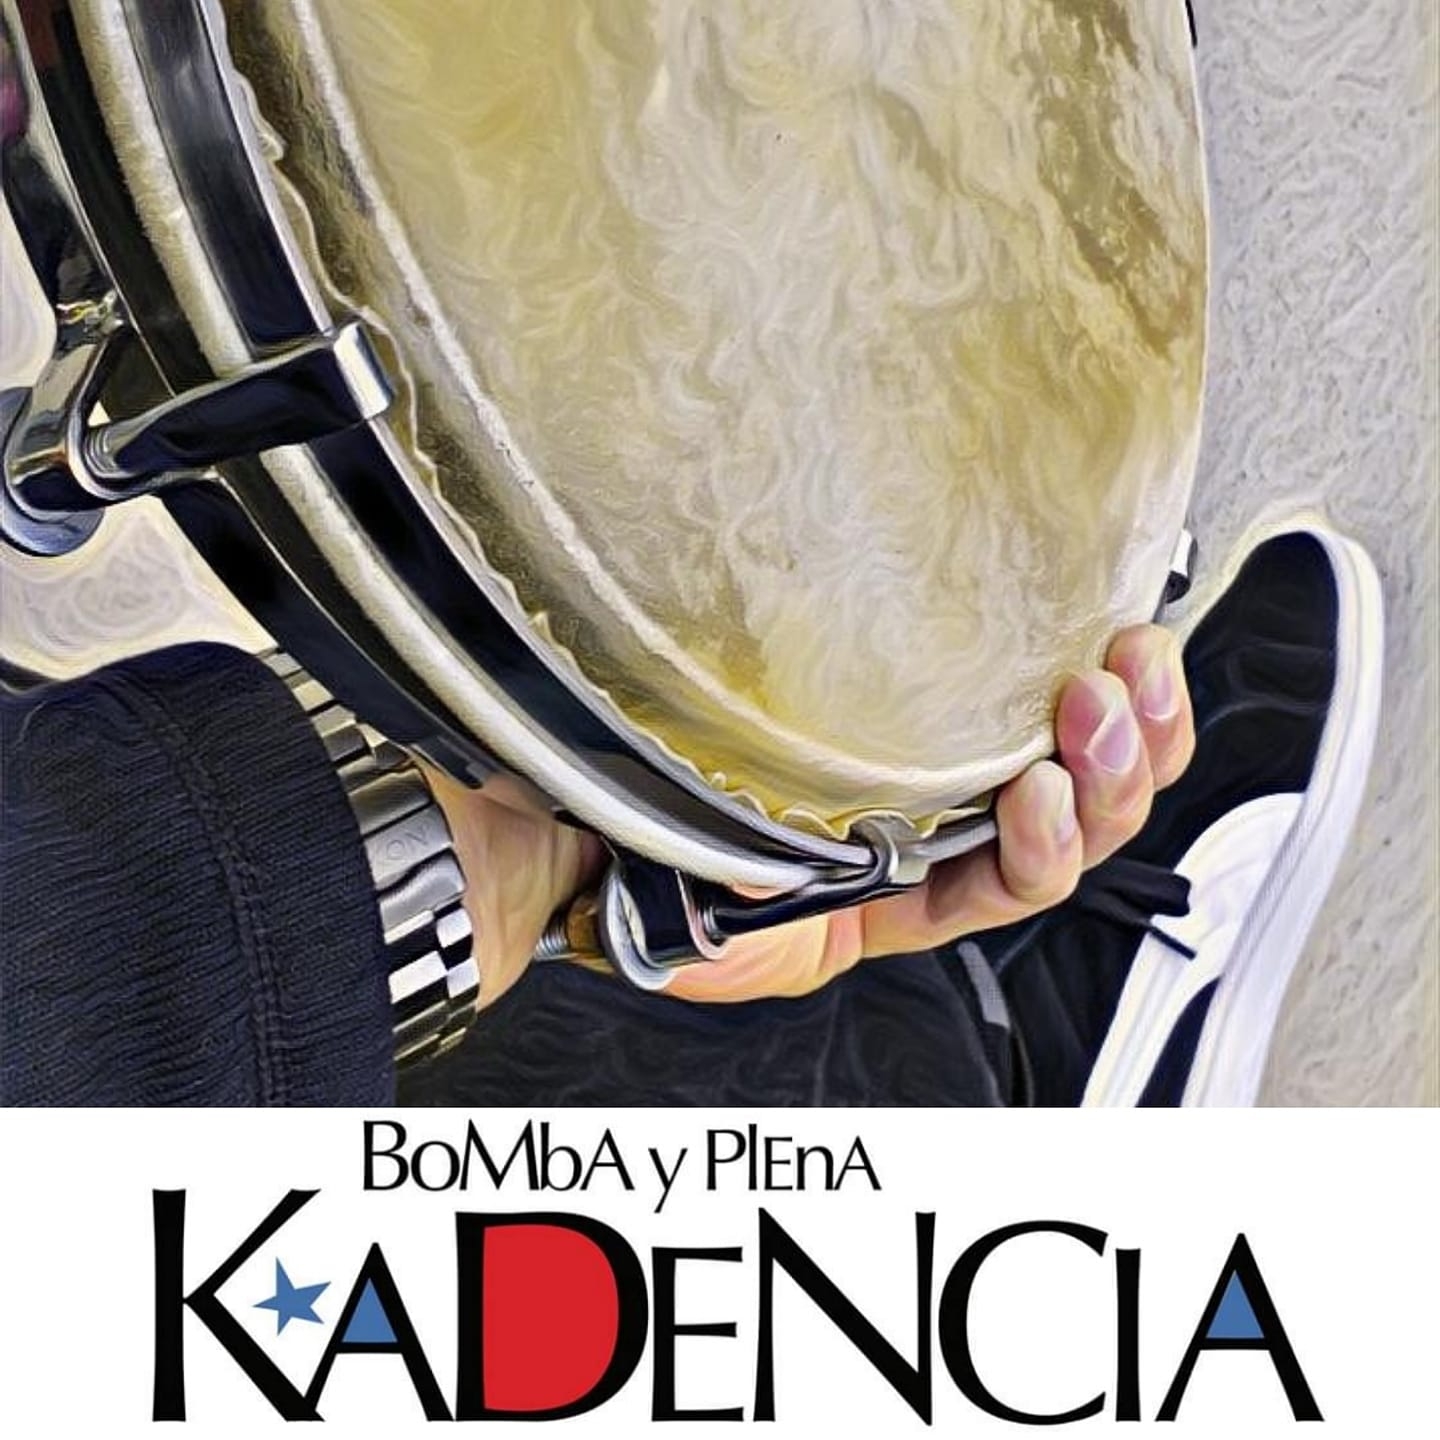 After his return to Puerto Rico, he was recruited by the PUERTO RICAN BRASS with whom he recorded his first musical work. After some time, however, he had to leave the group in order to pursue his university studies.